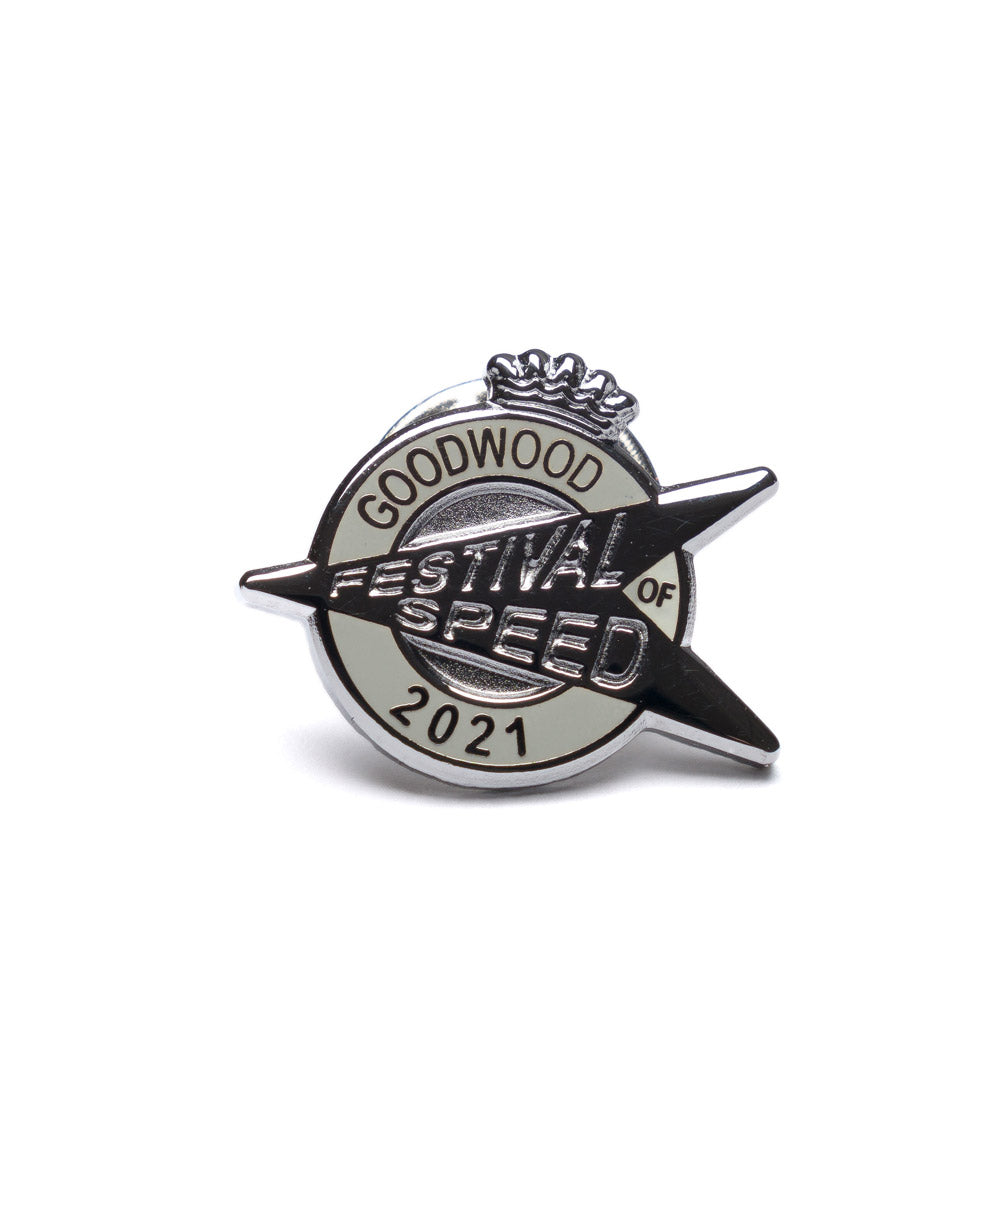 Goodwood Festival of Speed Pin Badge 2021